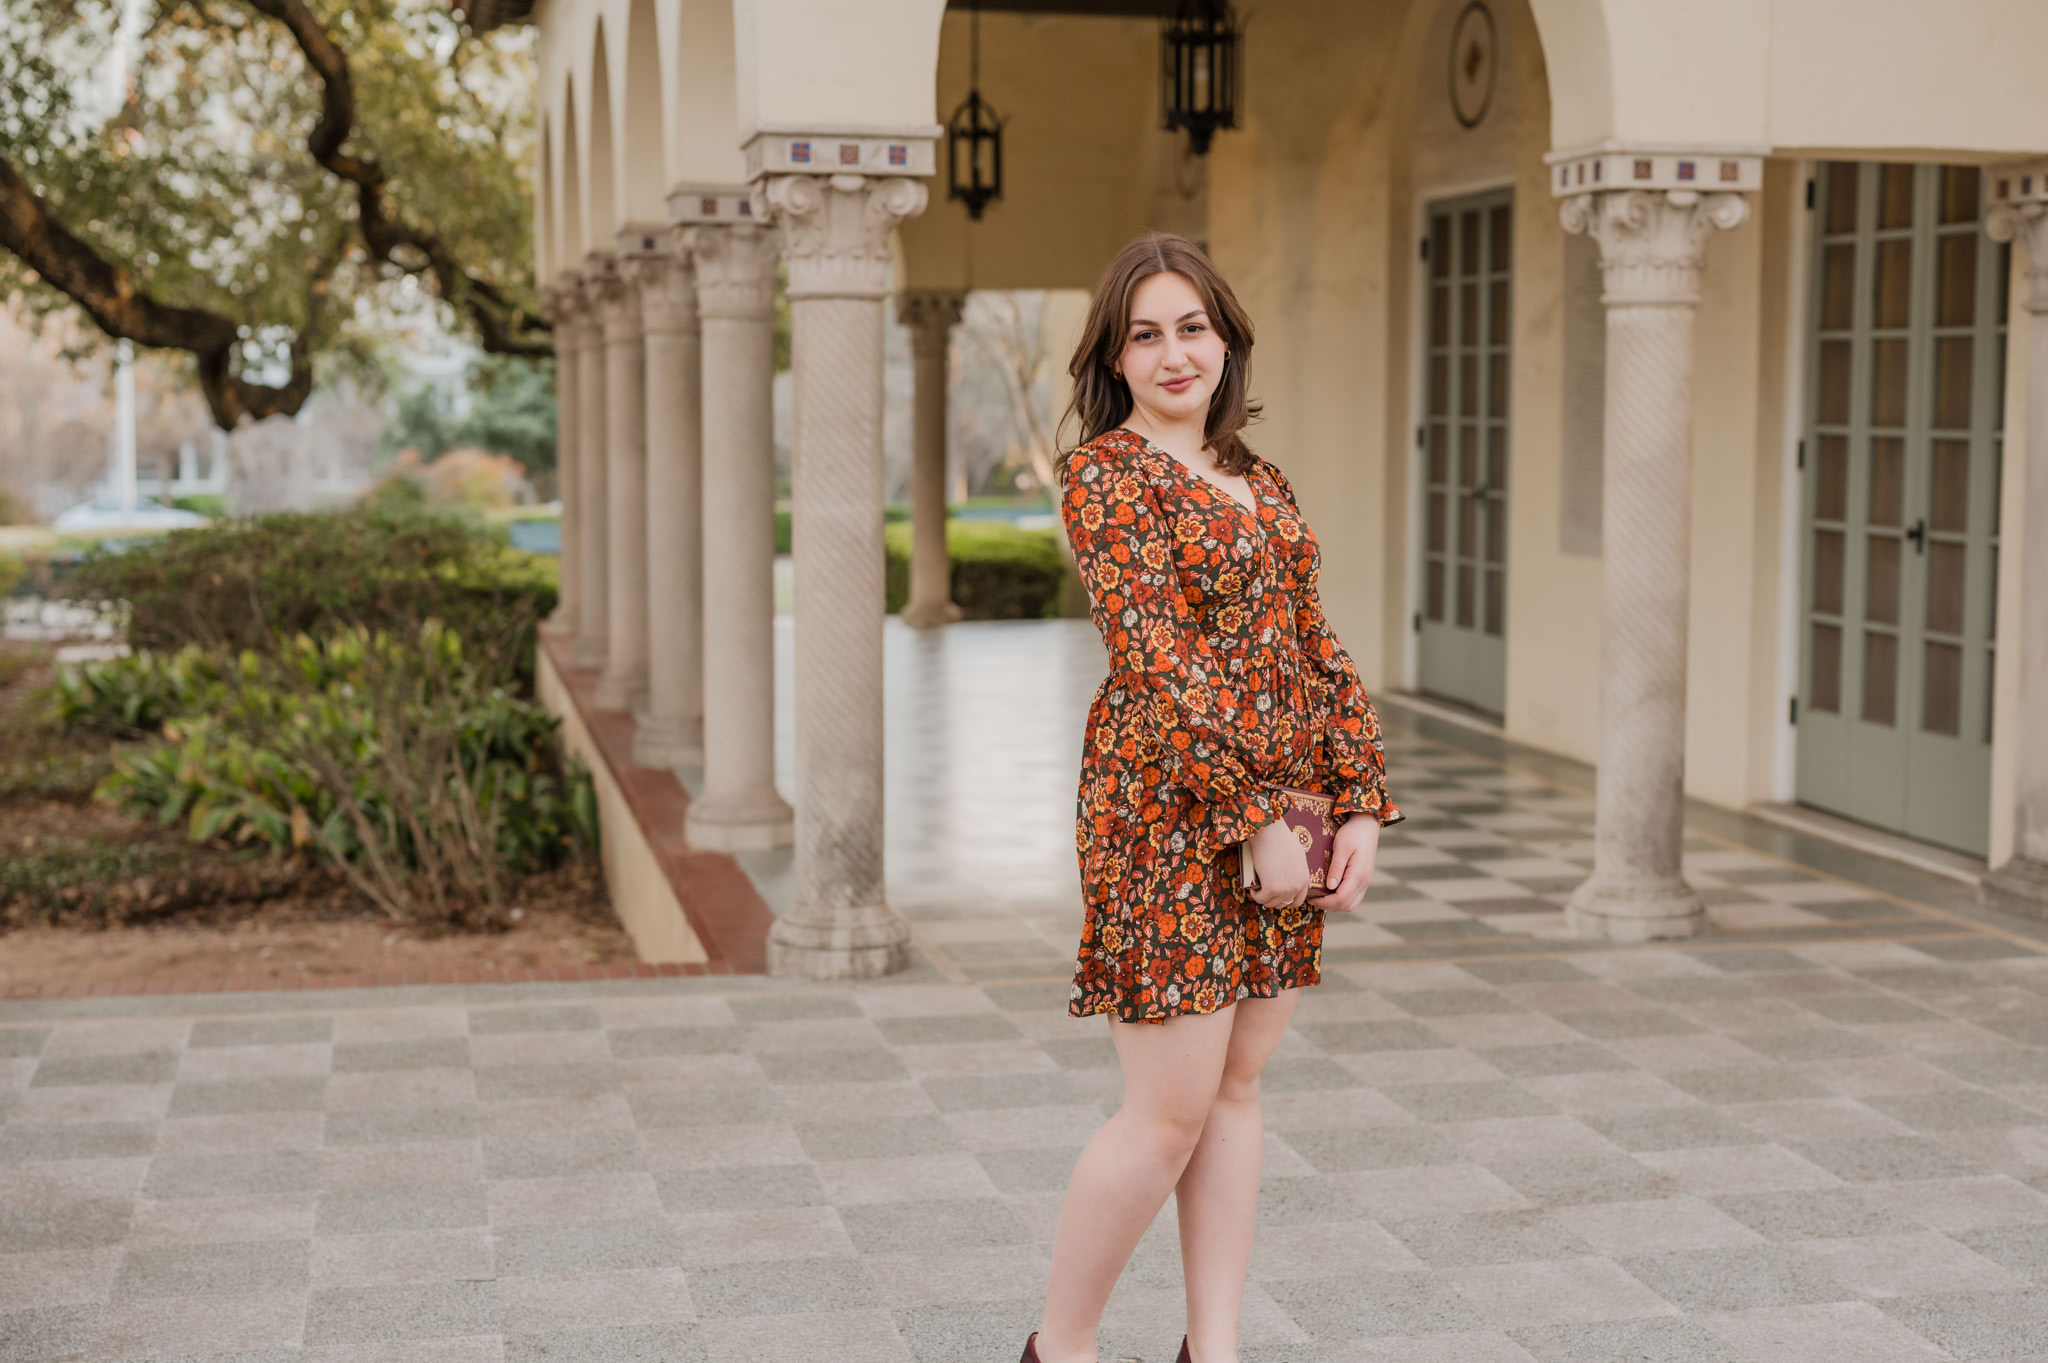 Senior portrait of a girl in a floral dress. She holds a novel and is standing on the back patio of Landa Library in San Antonio.